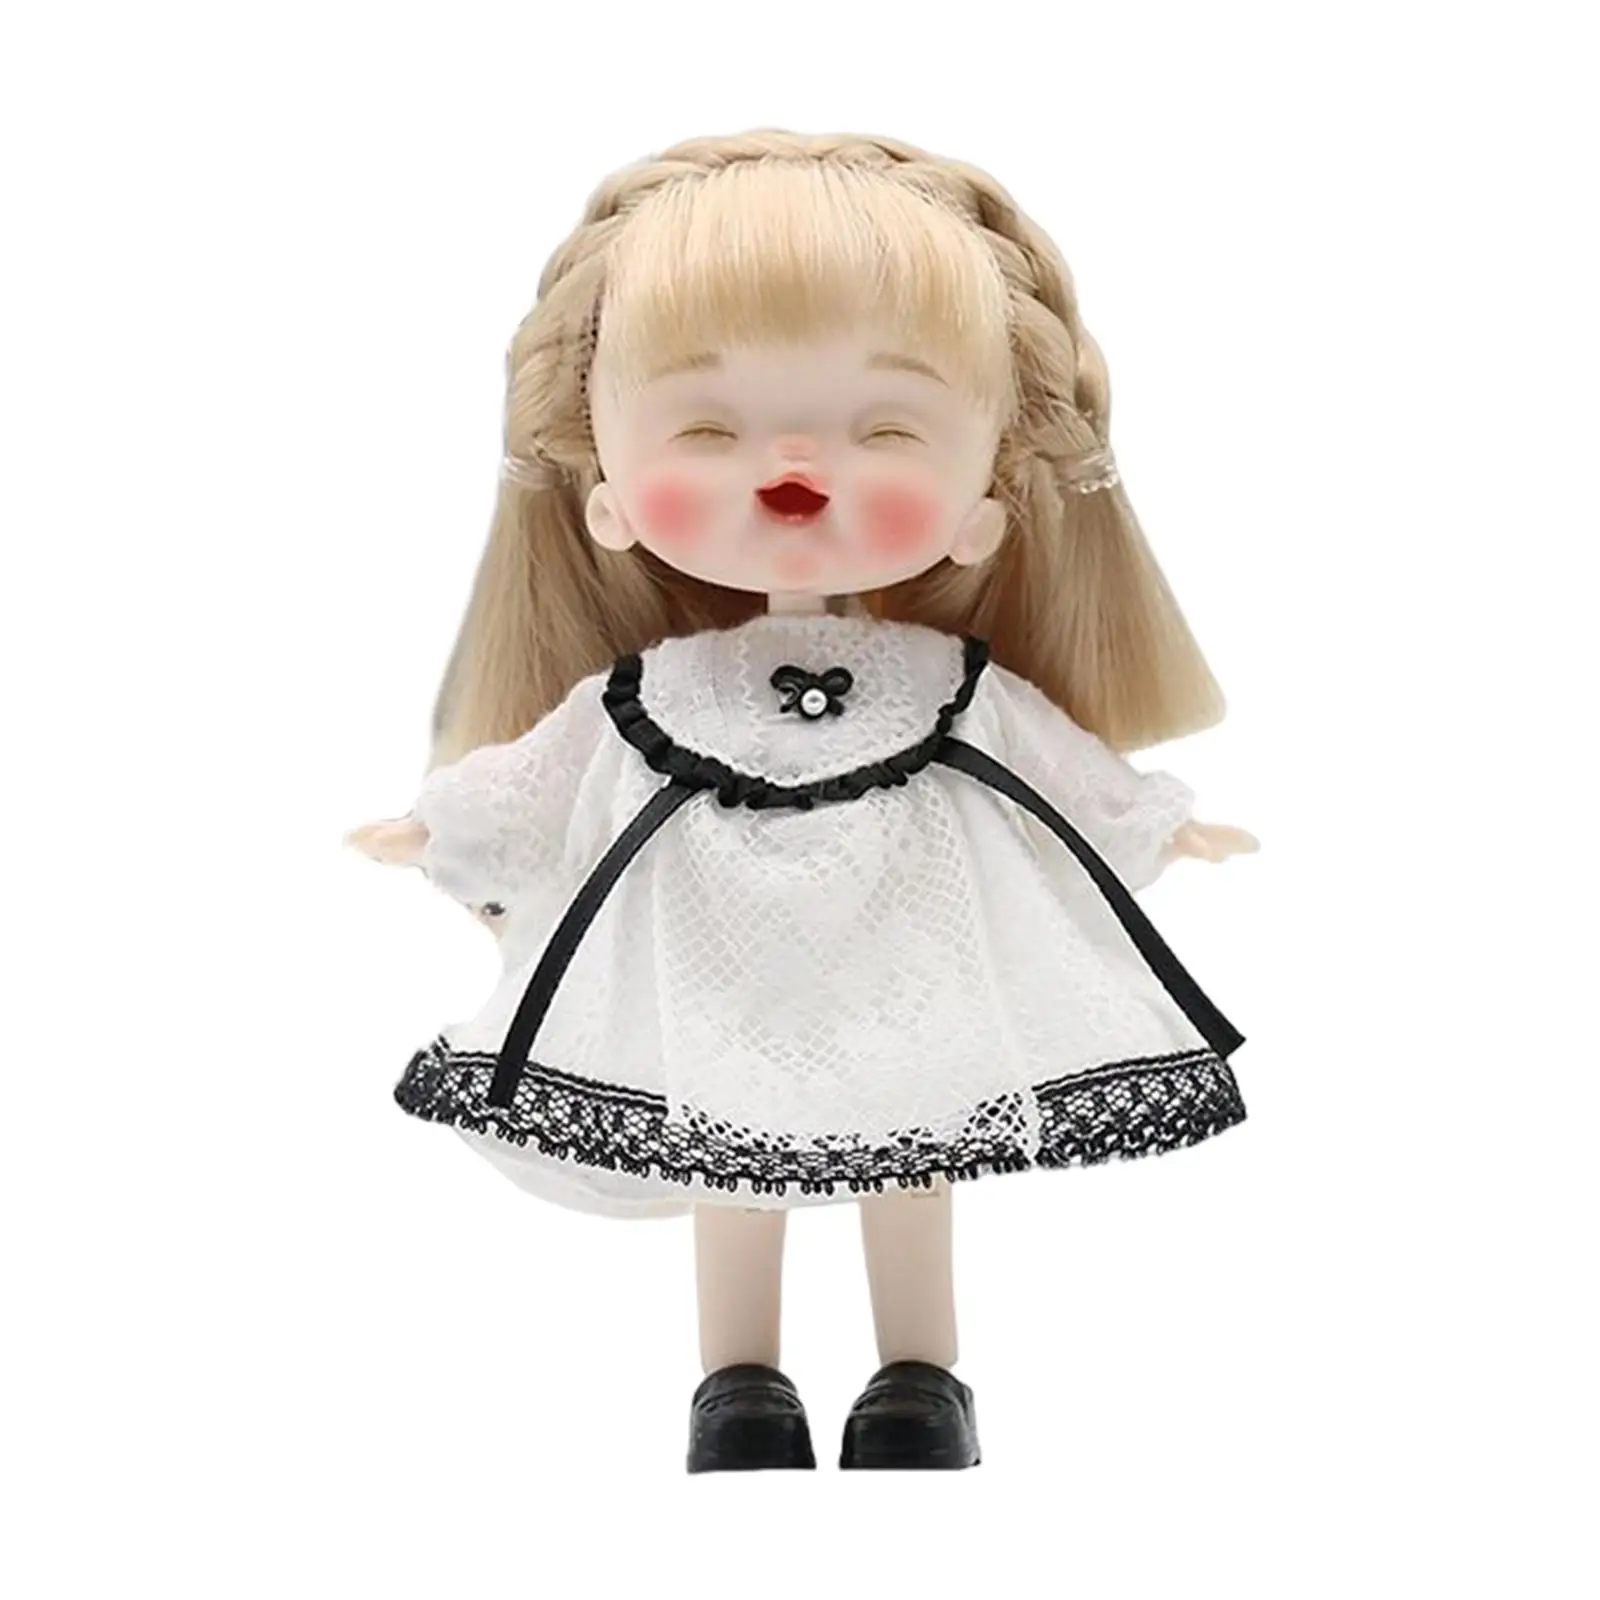 Mini Ball Jointed Baby Doll Dress up Accessories Bendable 14cm Kids Girls Toys makeup Doll for Birthday Graduation Gifts